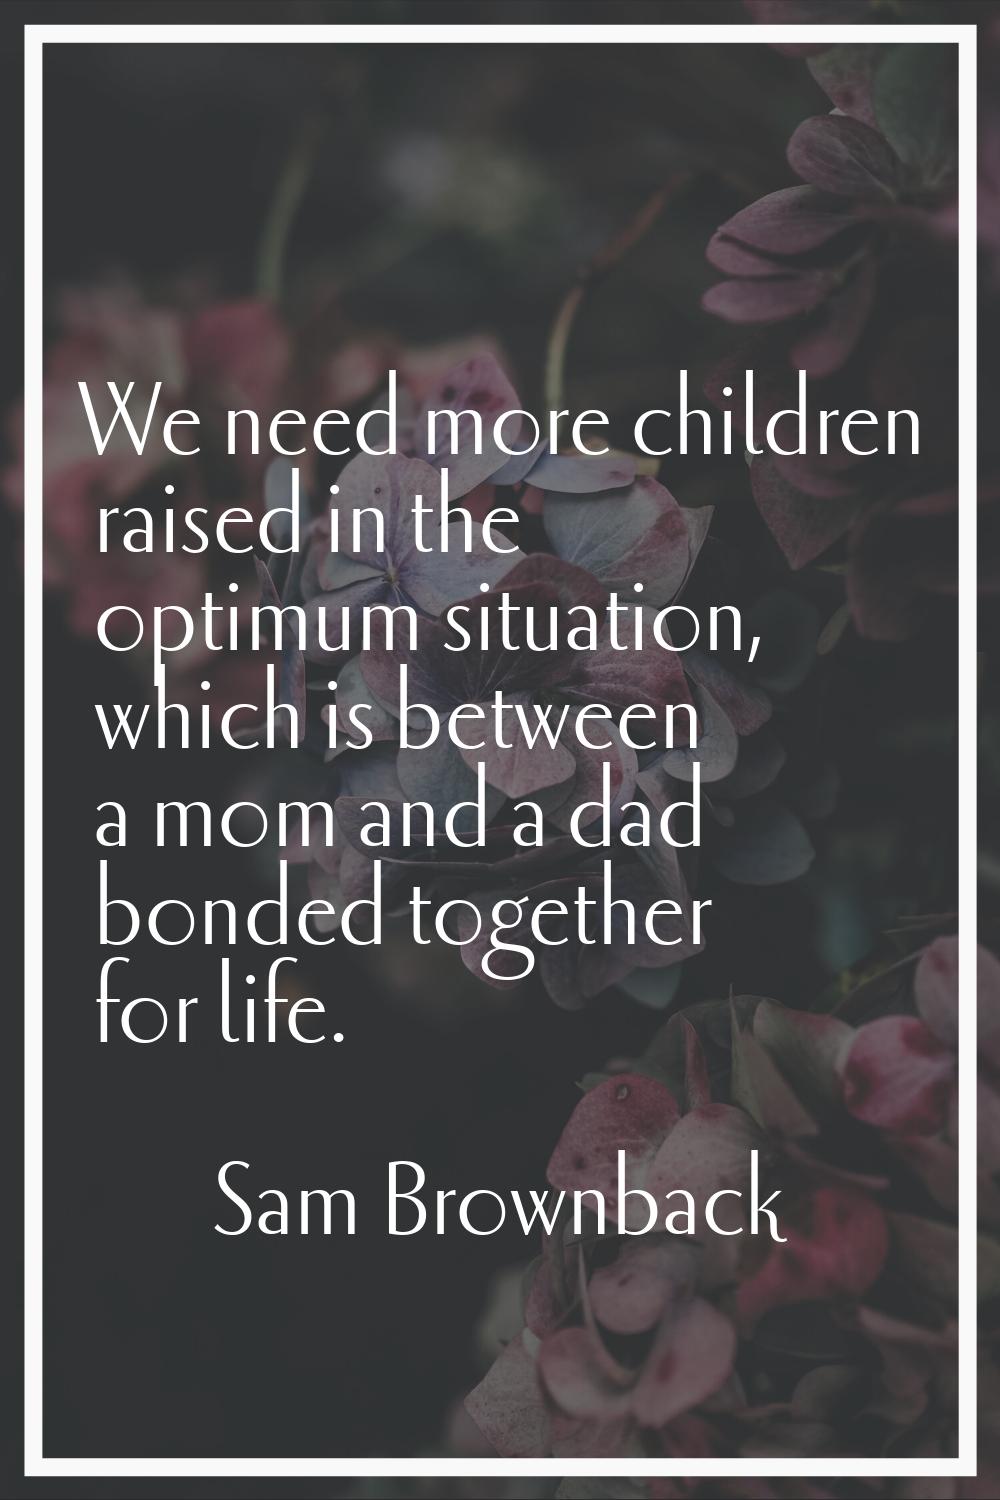 We need more children raised in the optimum situation, which is between a mom and a dad bonded toge